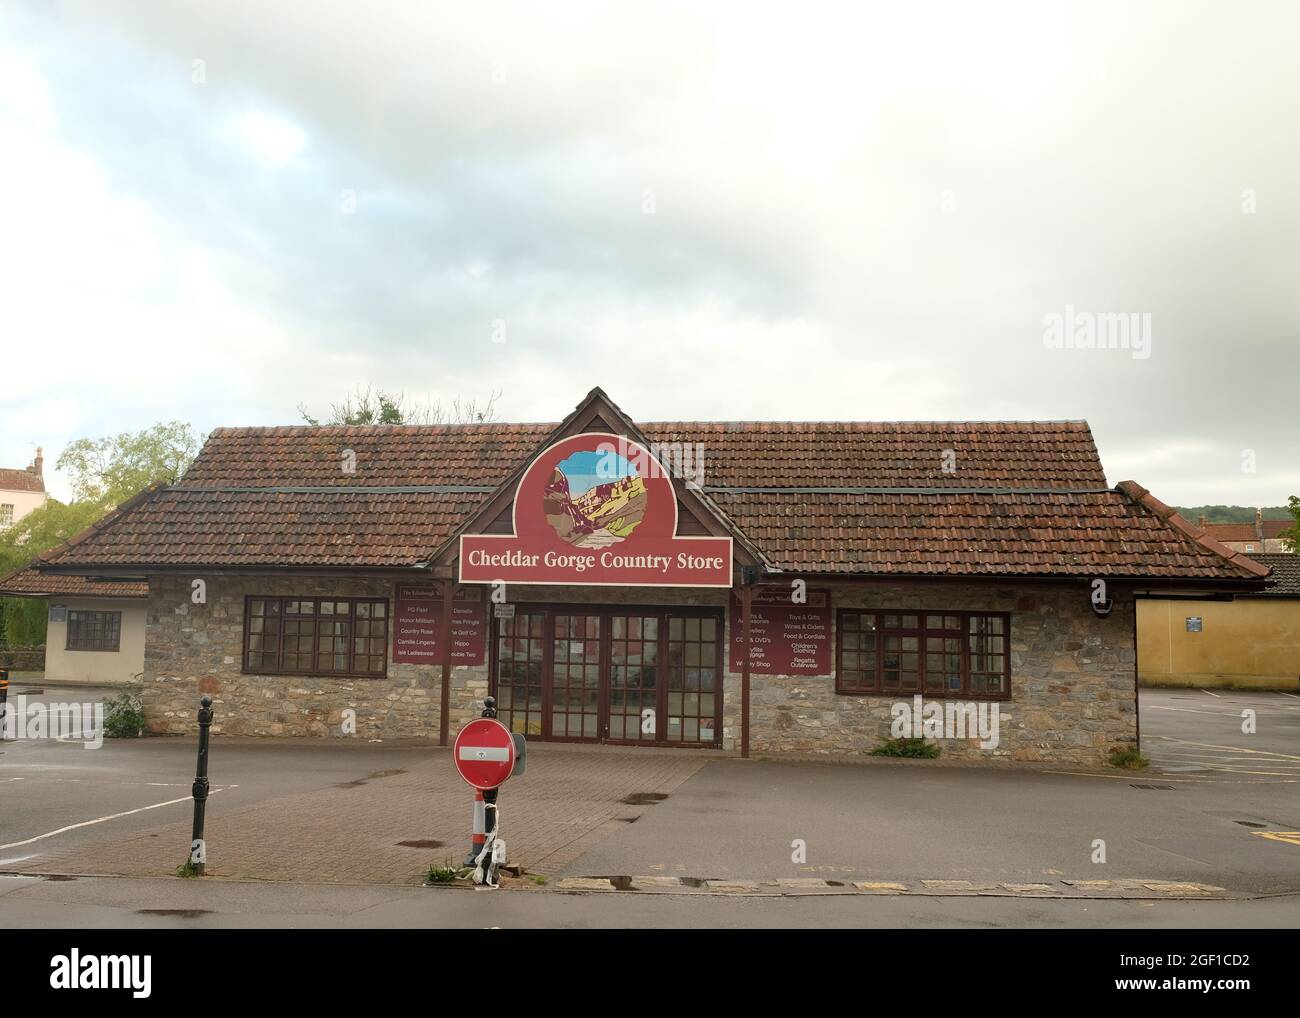 August 2021 - The now closed Edinburgh Woollen Mill shop in Cheddar Gorge and shops Stock Photo